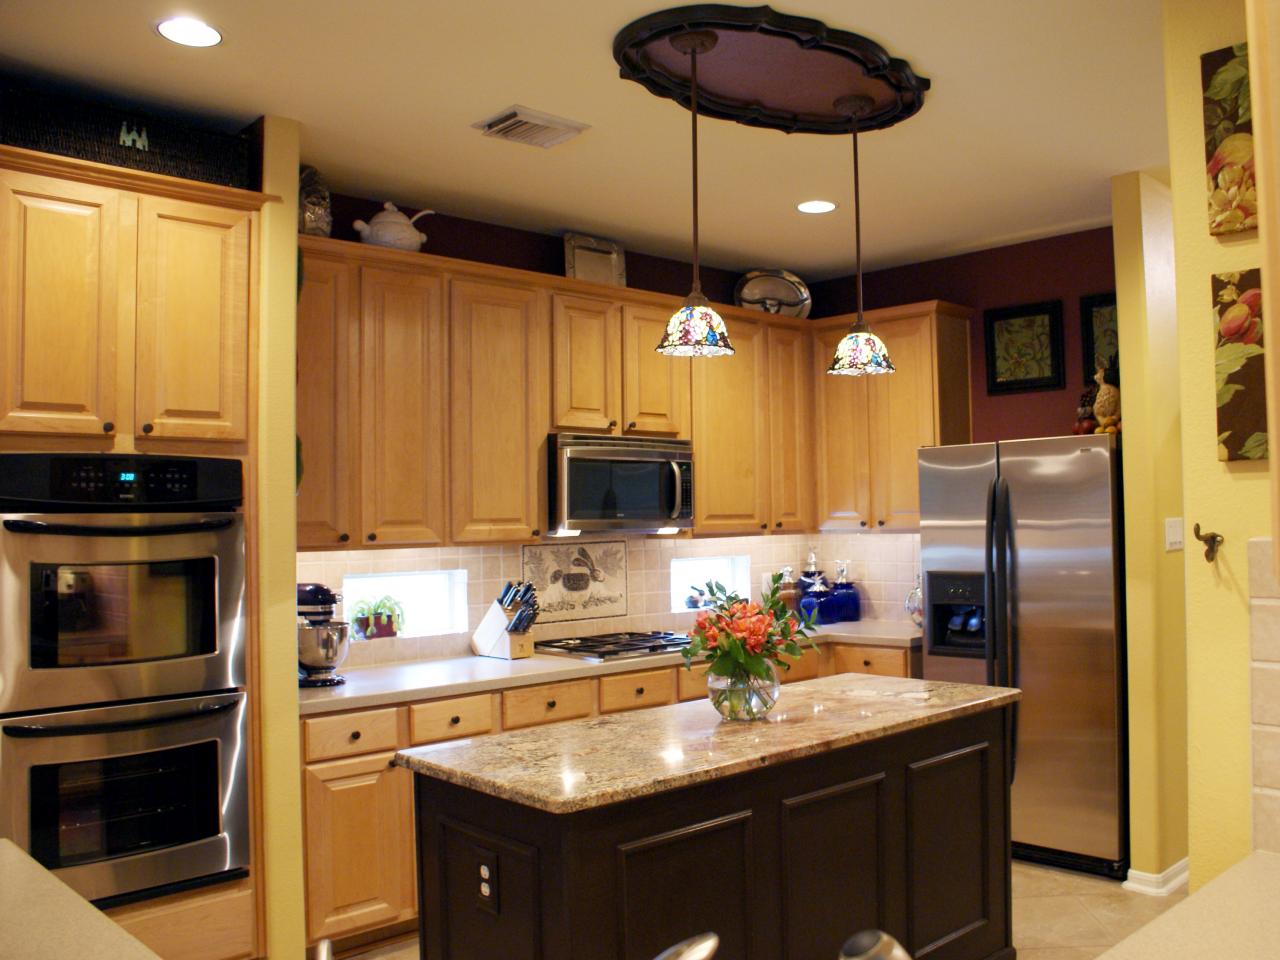 Cabinets Should You Replace Or Reface, Should I Paint Or Replace Kitchen Cabinets